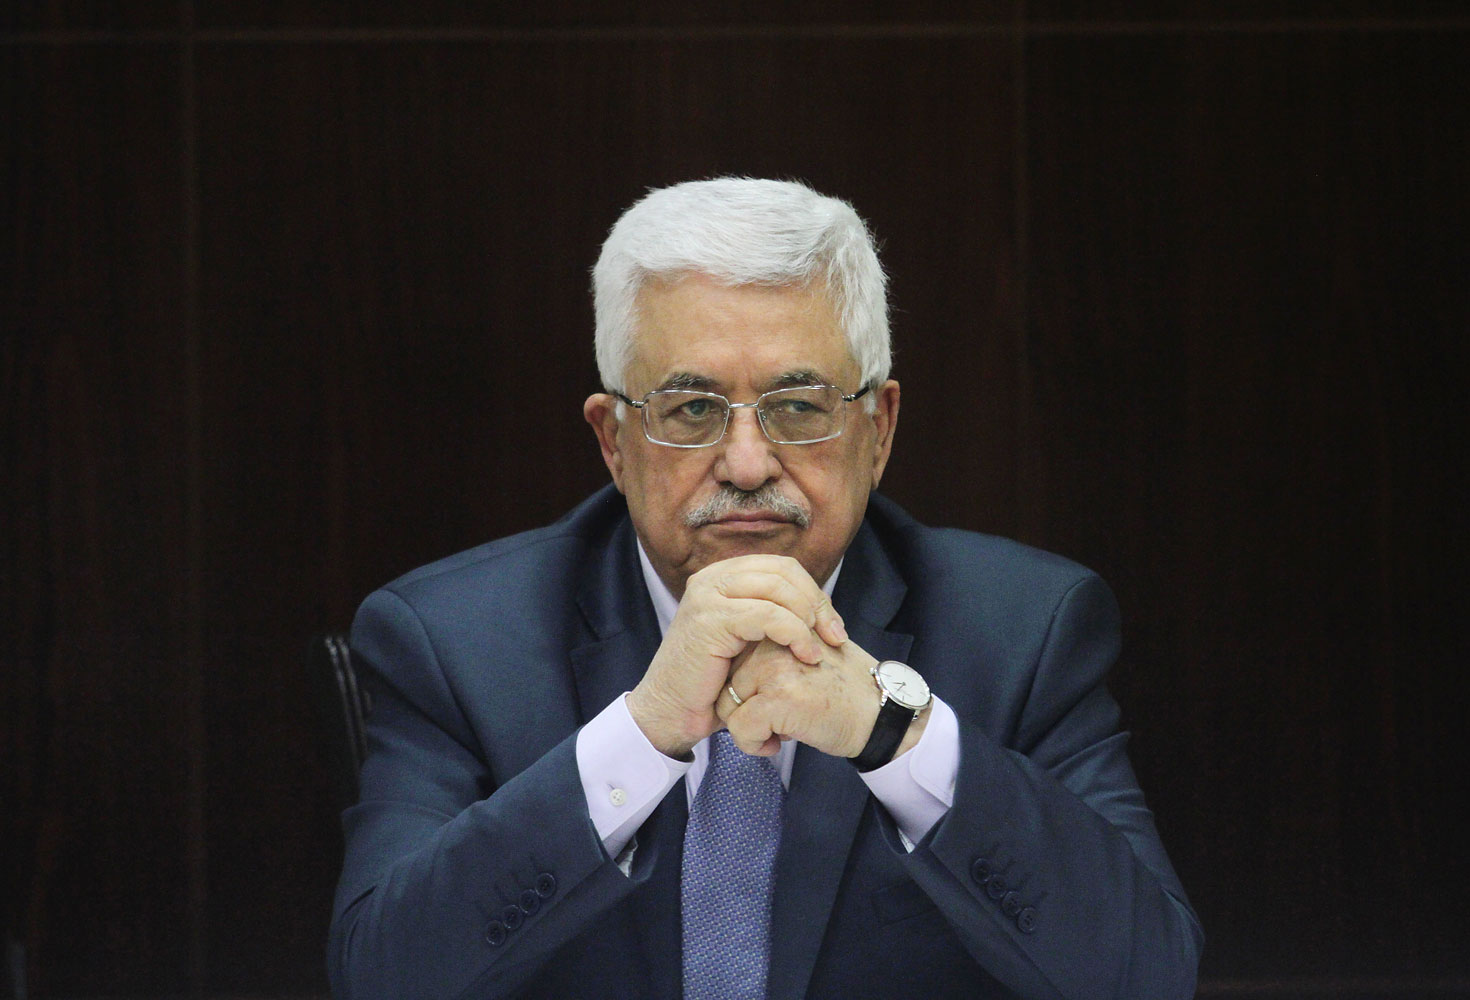 Palestinian National Authority President Mahmoud Abbas chairs a Cabinet session in the West Bank city of Ramallah on July 28, 2013 (Issam Romawi—AFP/Getty Images)